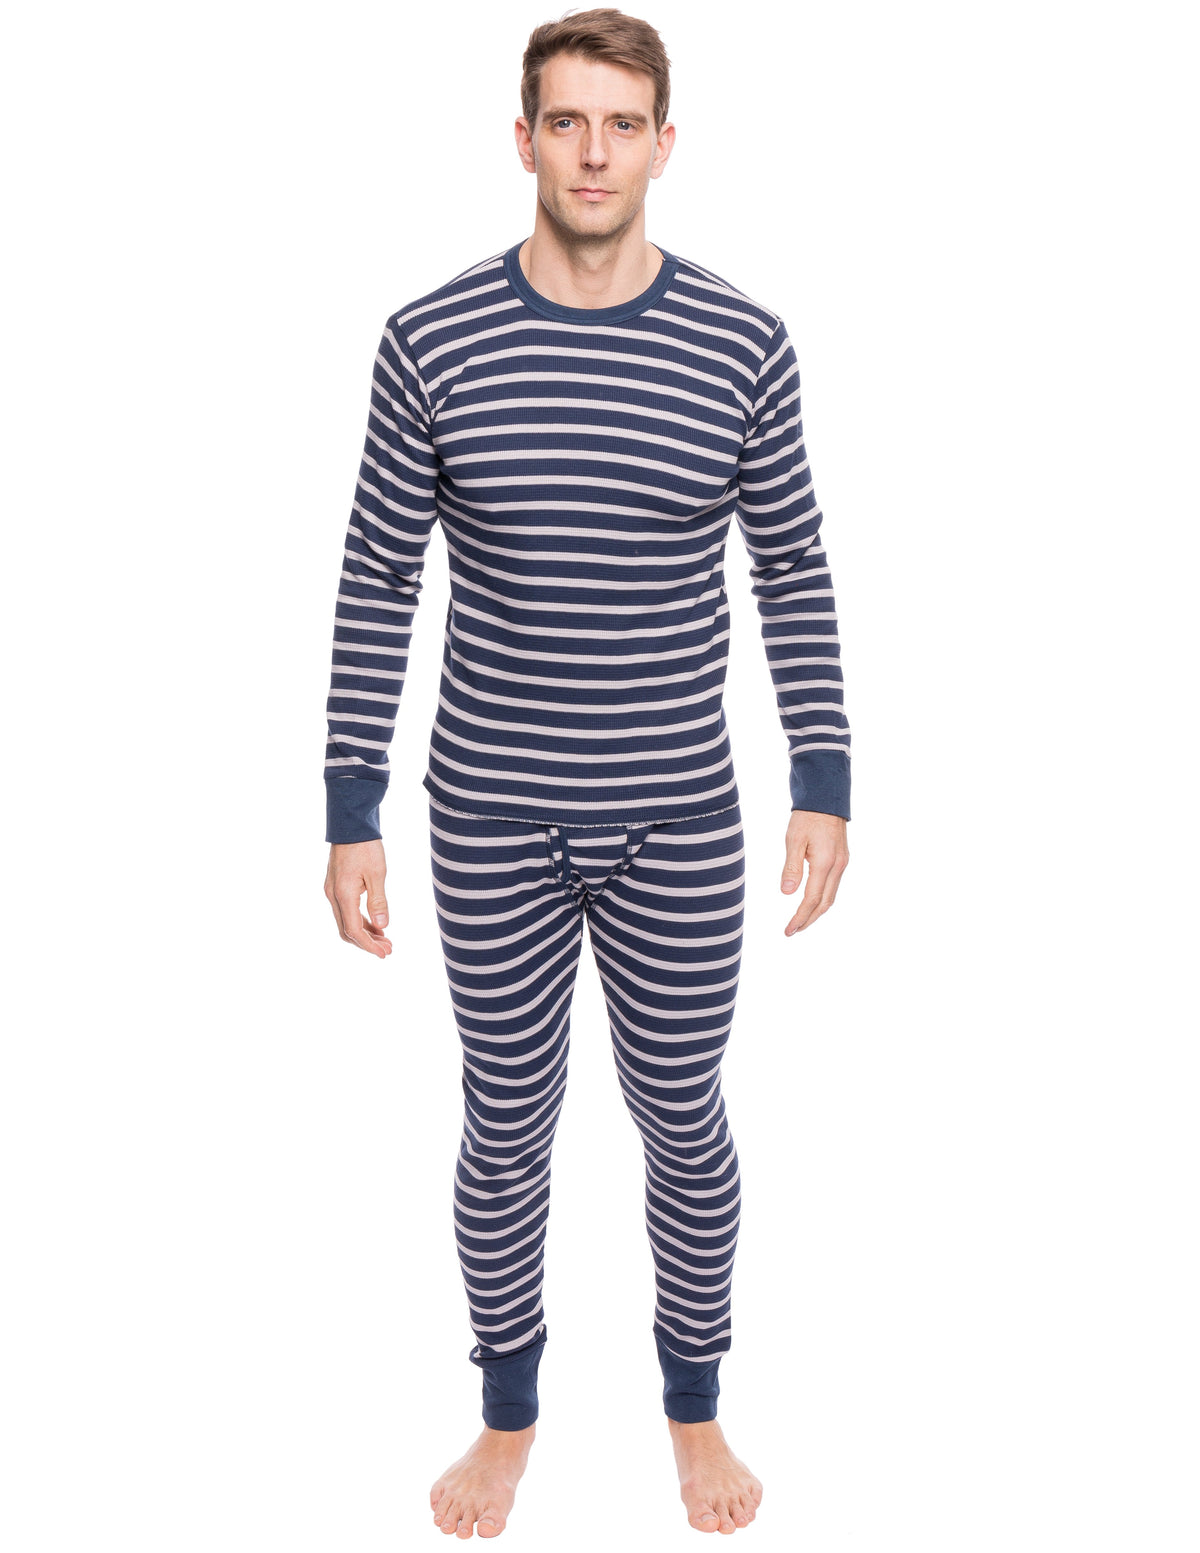 Men's Extreme Cold Waffle Knit Thermal Top and Bottom Set - Stripes Navy/Heather Grey